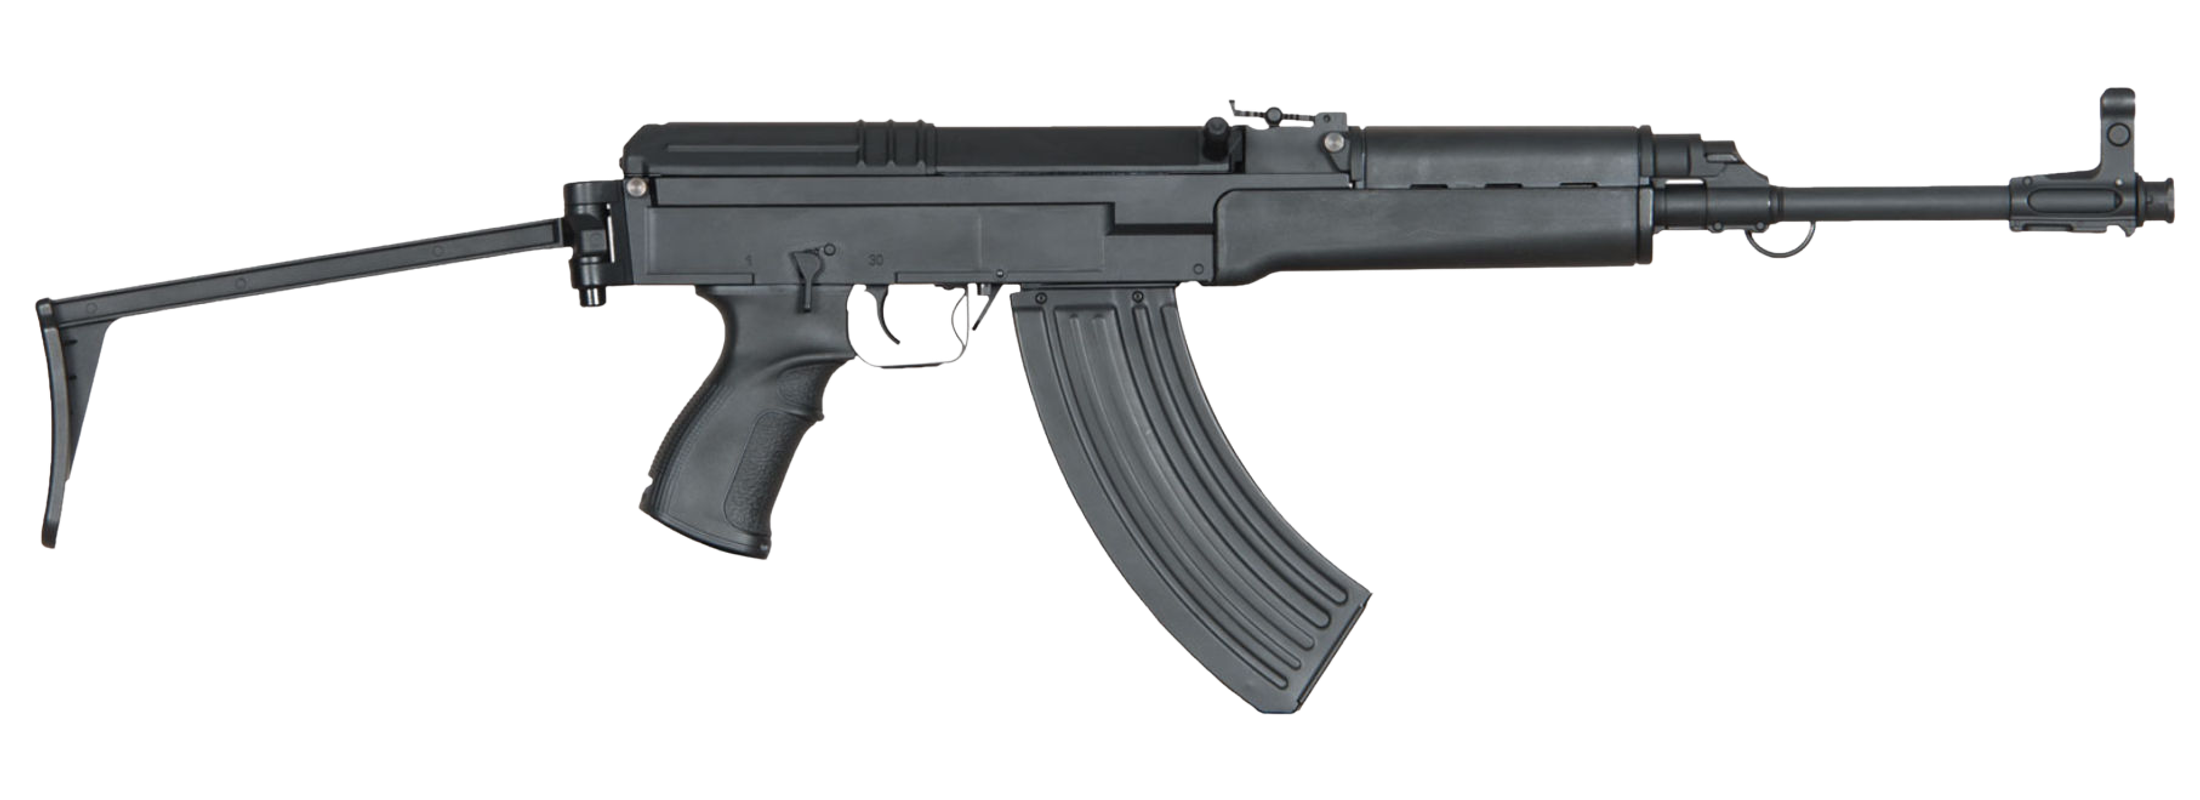 Ares VZ58 Long